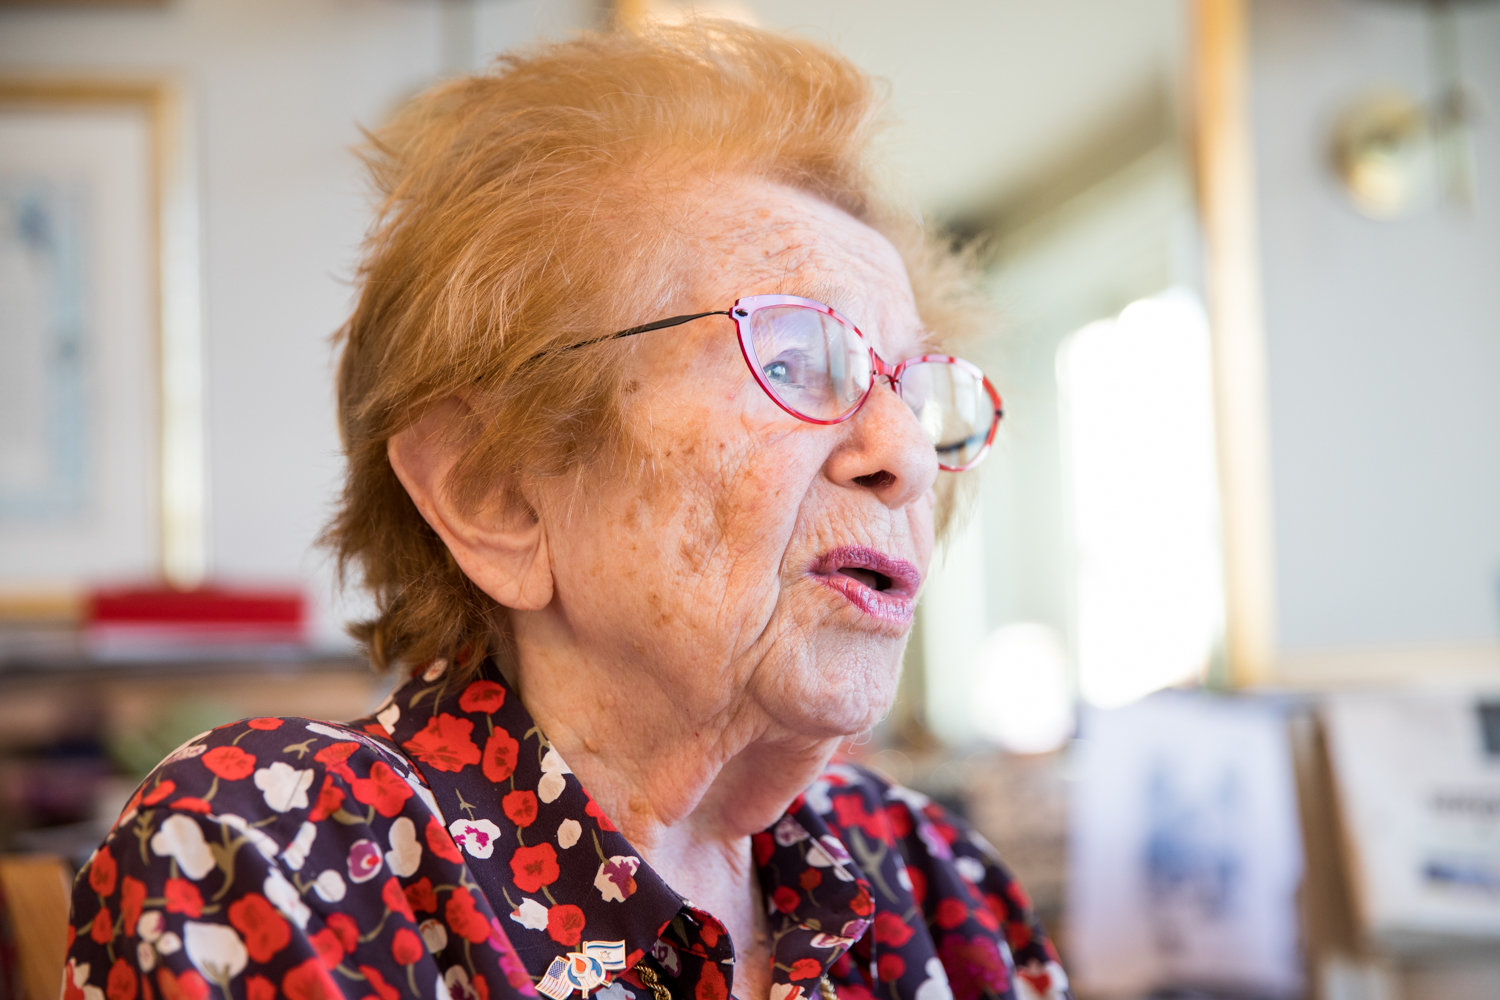 Dr. Ruth K. Westheimer talks about her life and work, and how she is raising money for a new psychology scholarship at American Associates Ben-Gurion University of the Negev in Israel, which will also award her this May with an honorary doctorate.